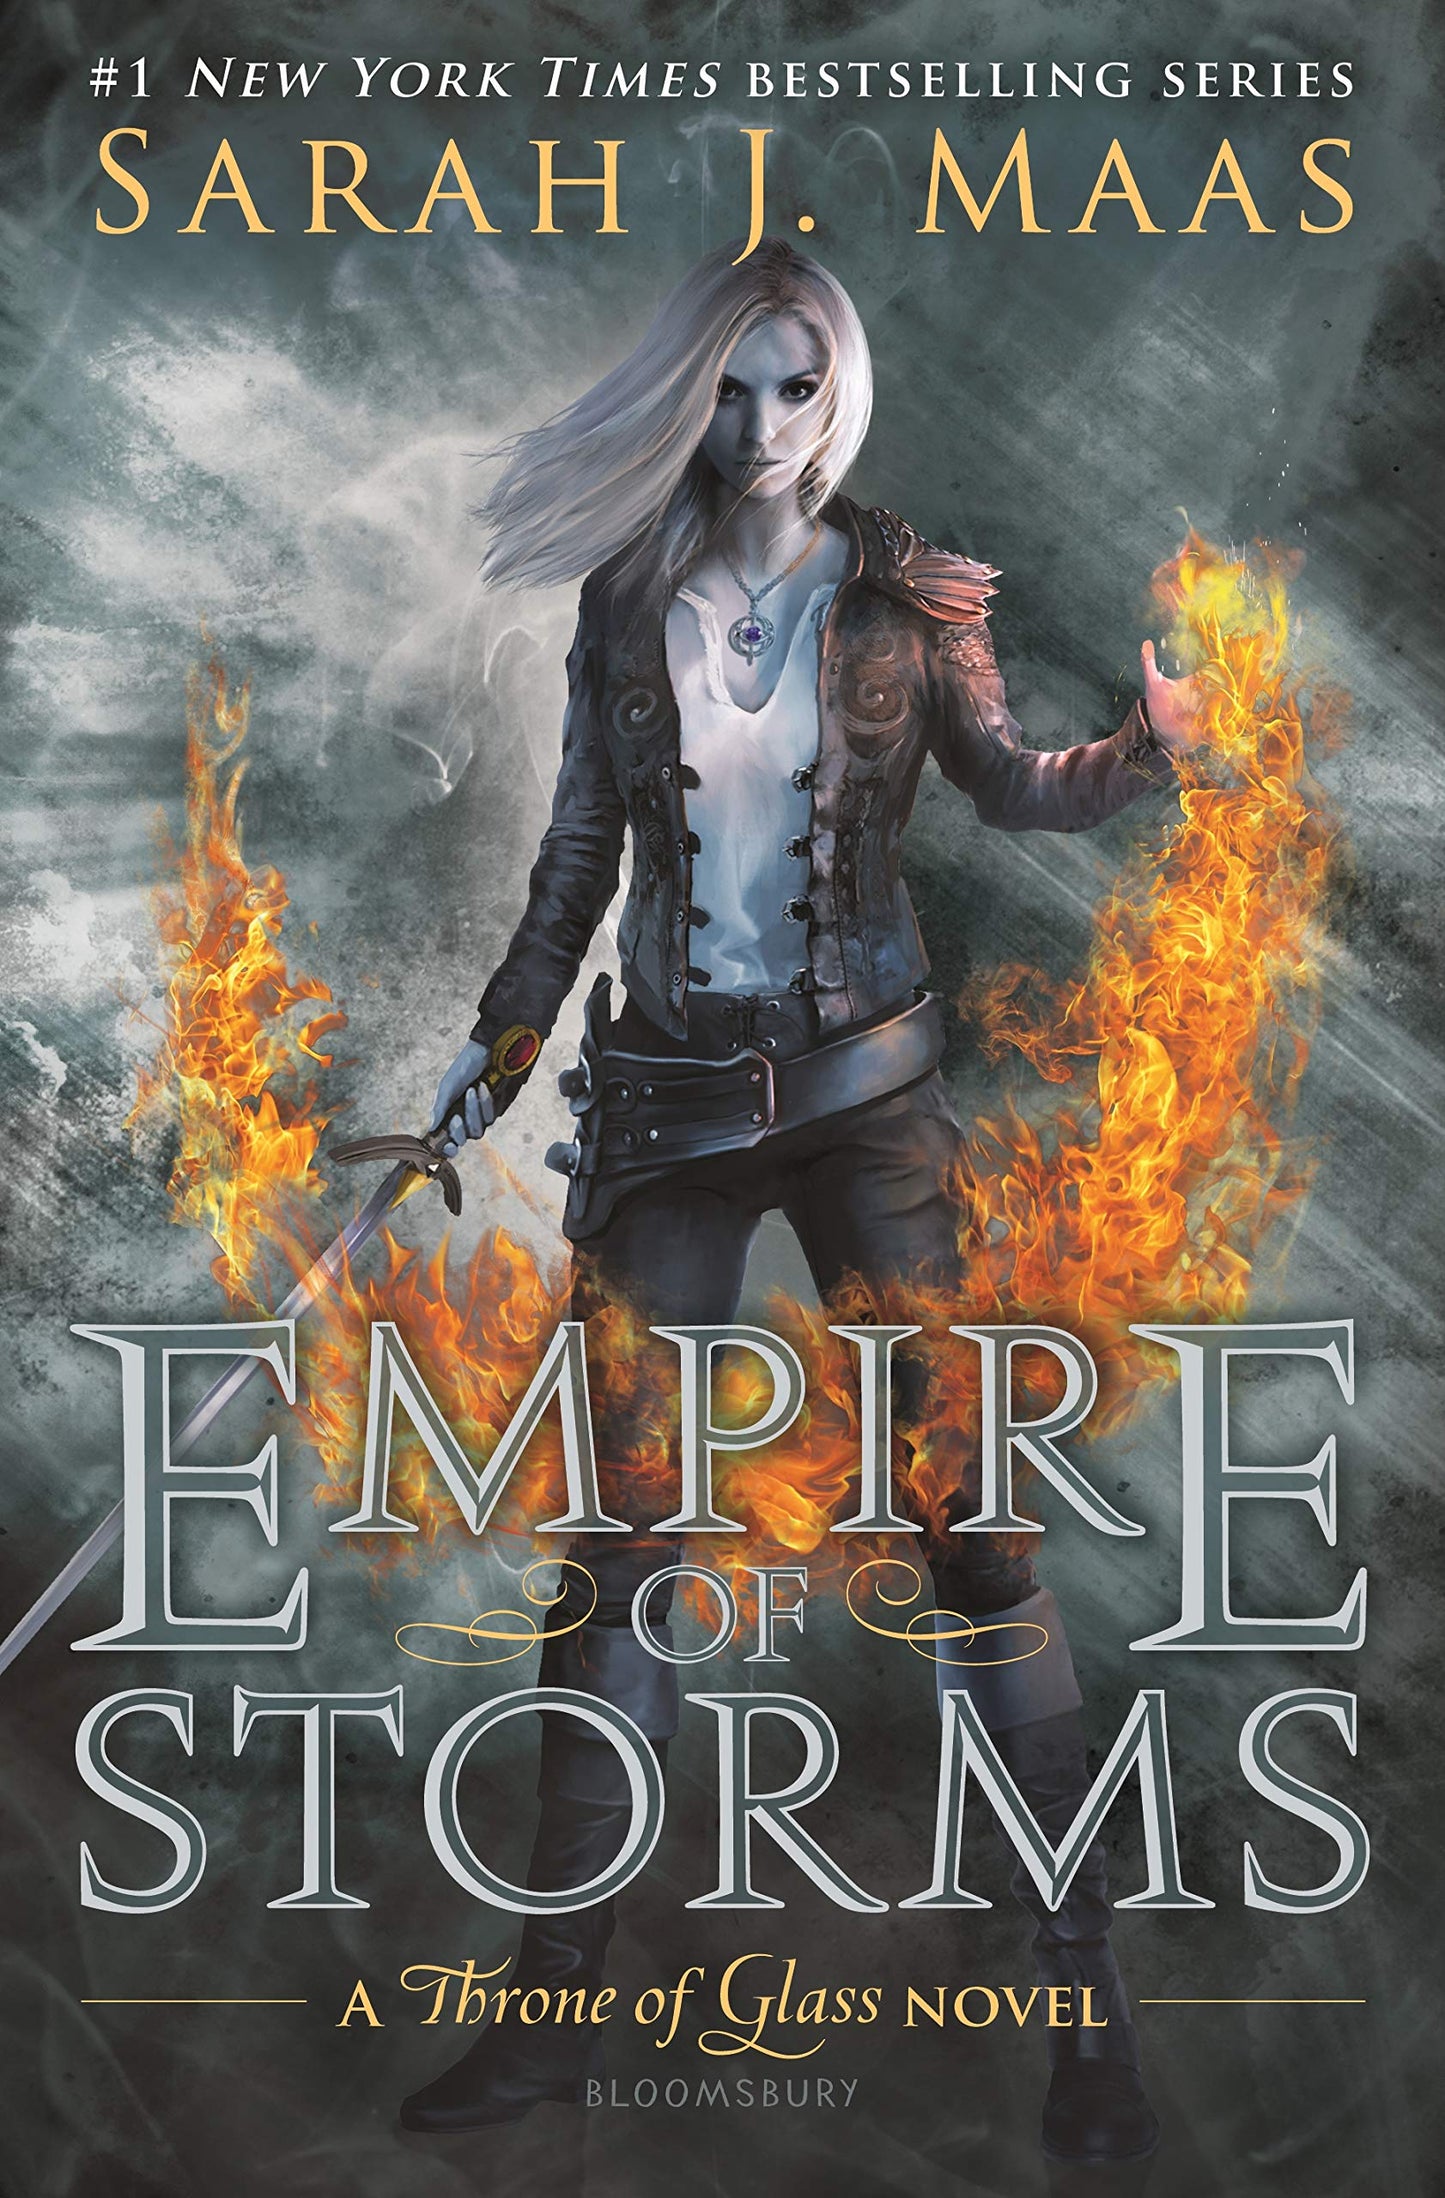 Empire of Storms - Sarah J. Maas (Throne of Glass - Book 5)